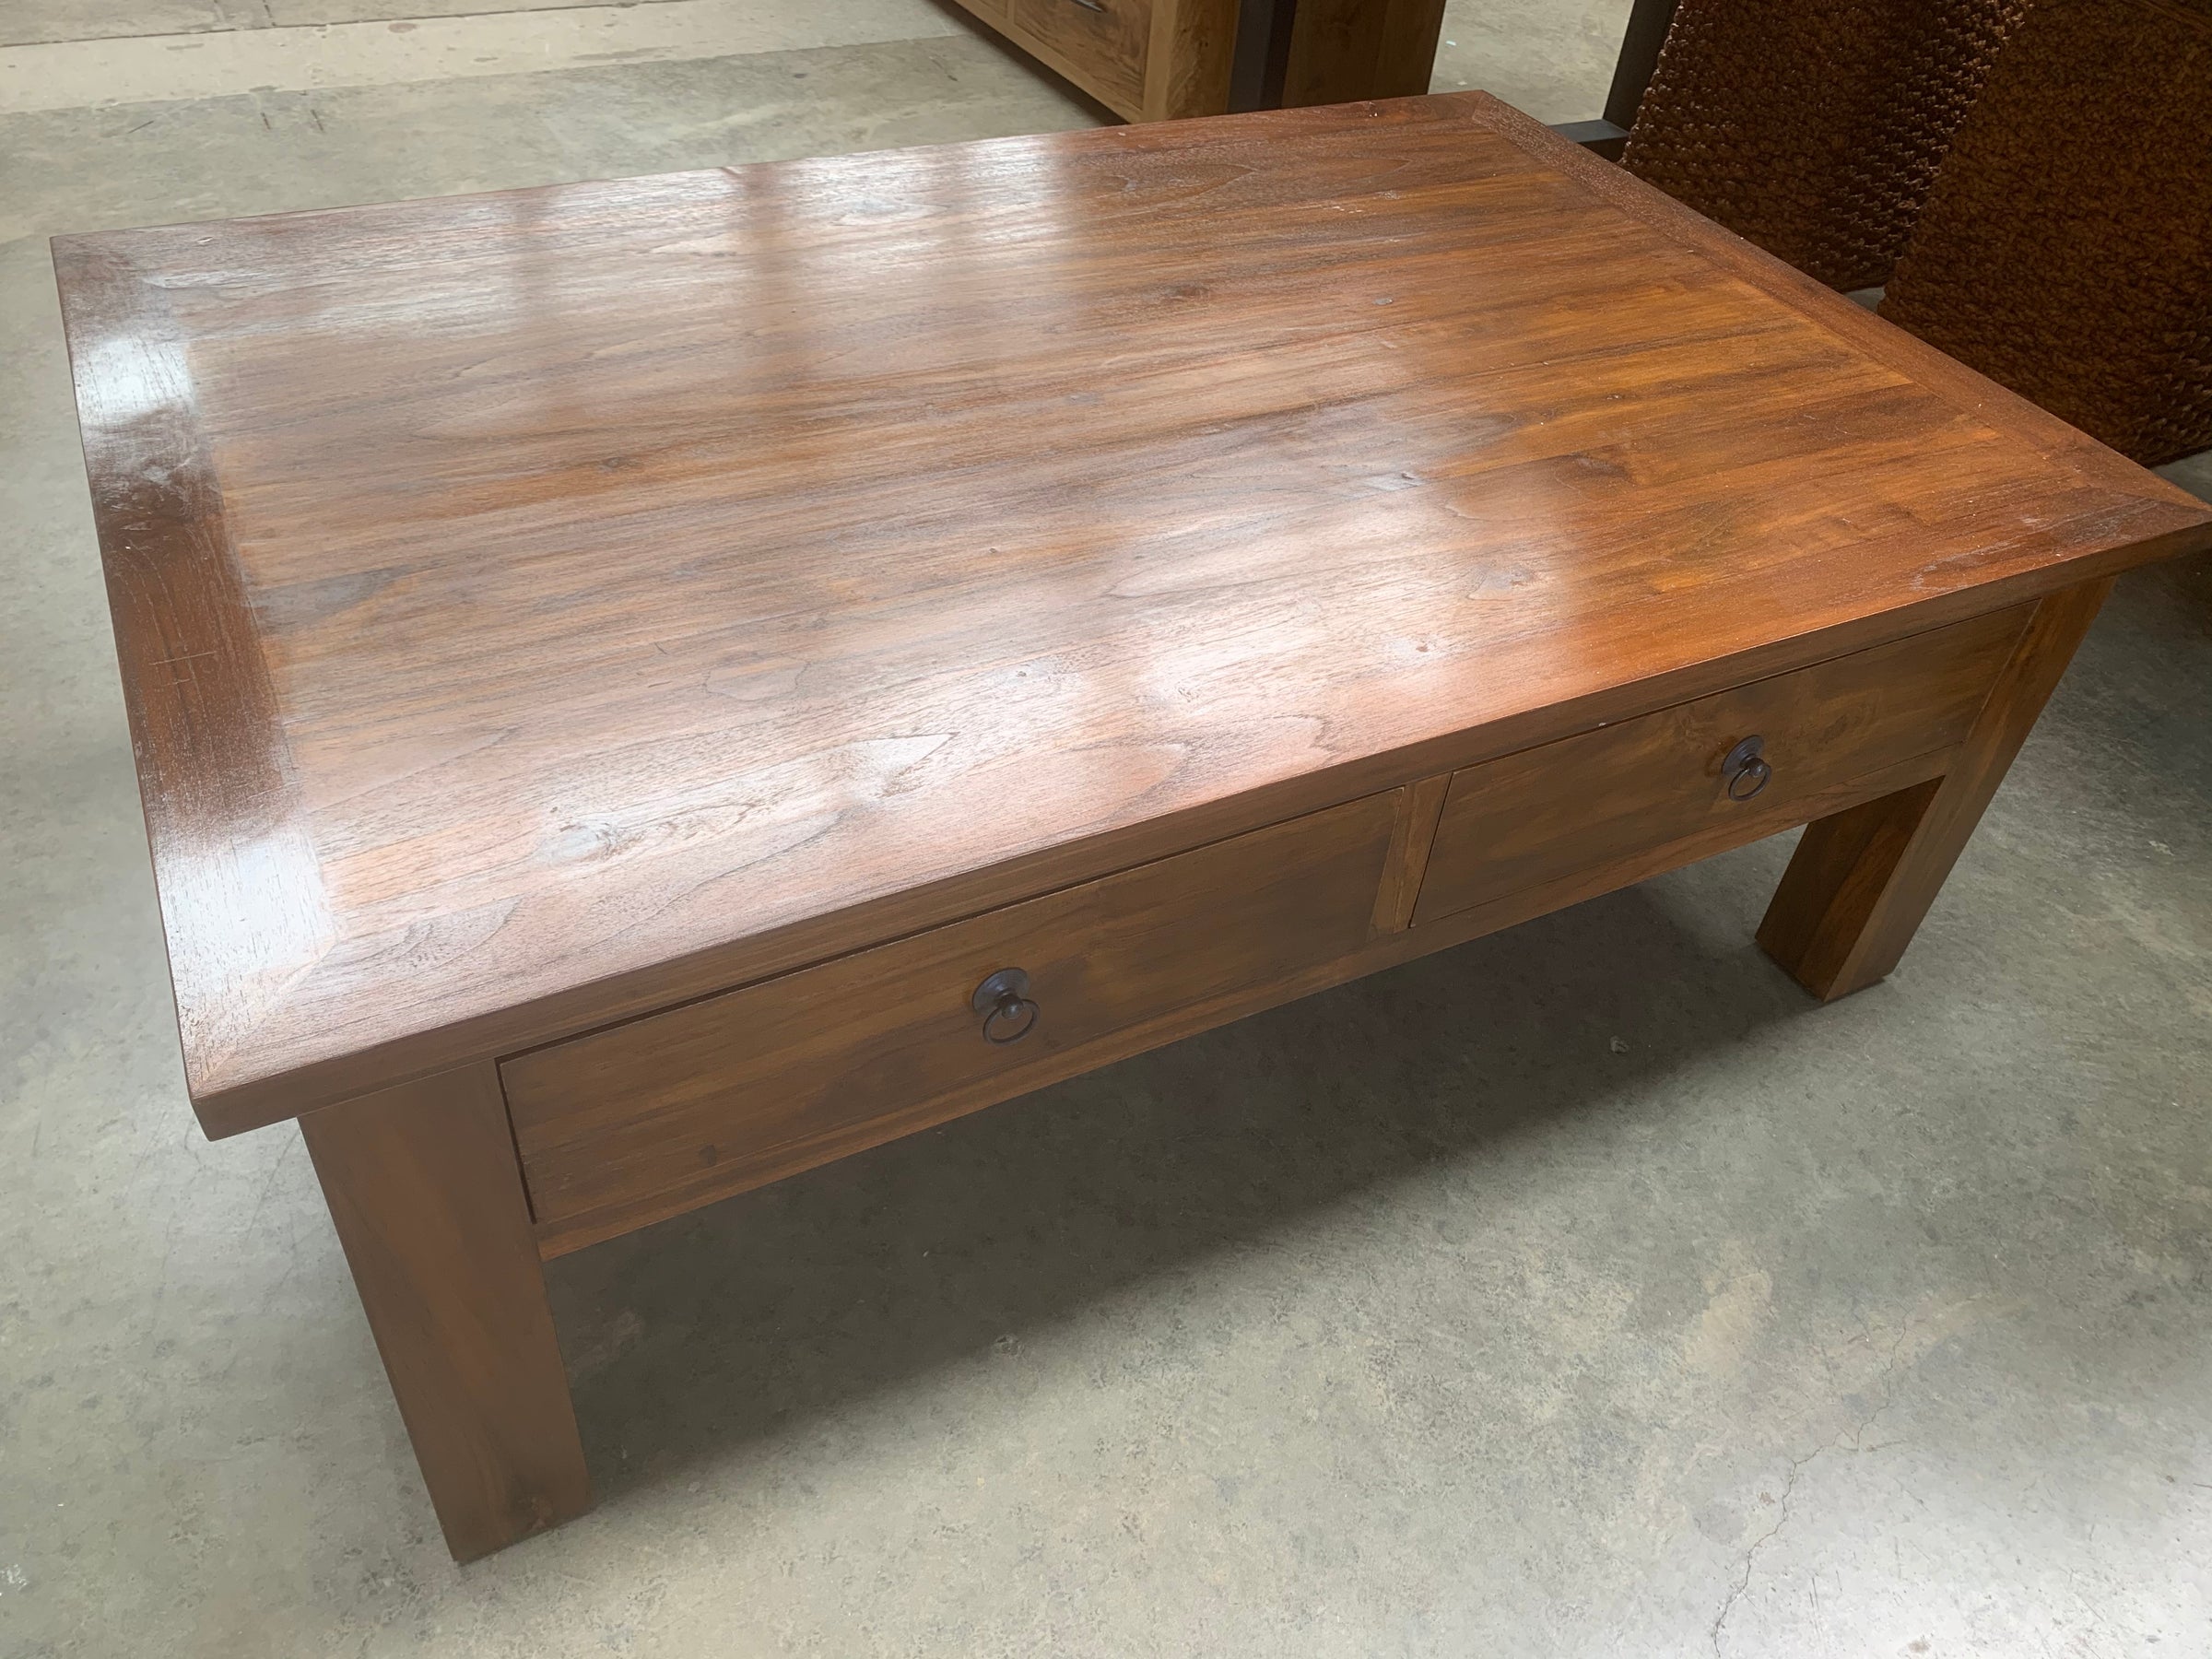 Teak Coffee Table with Drawers